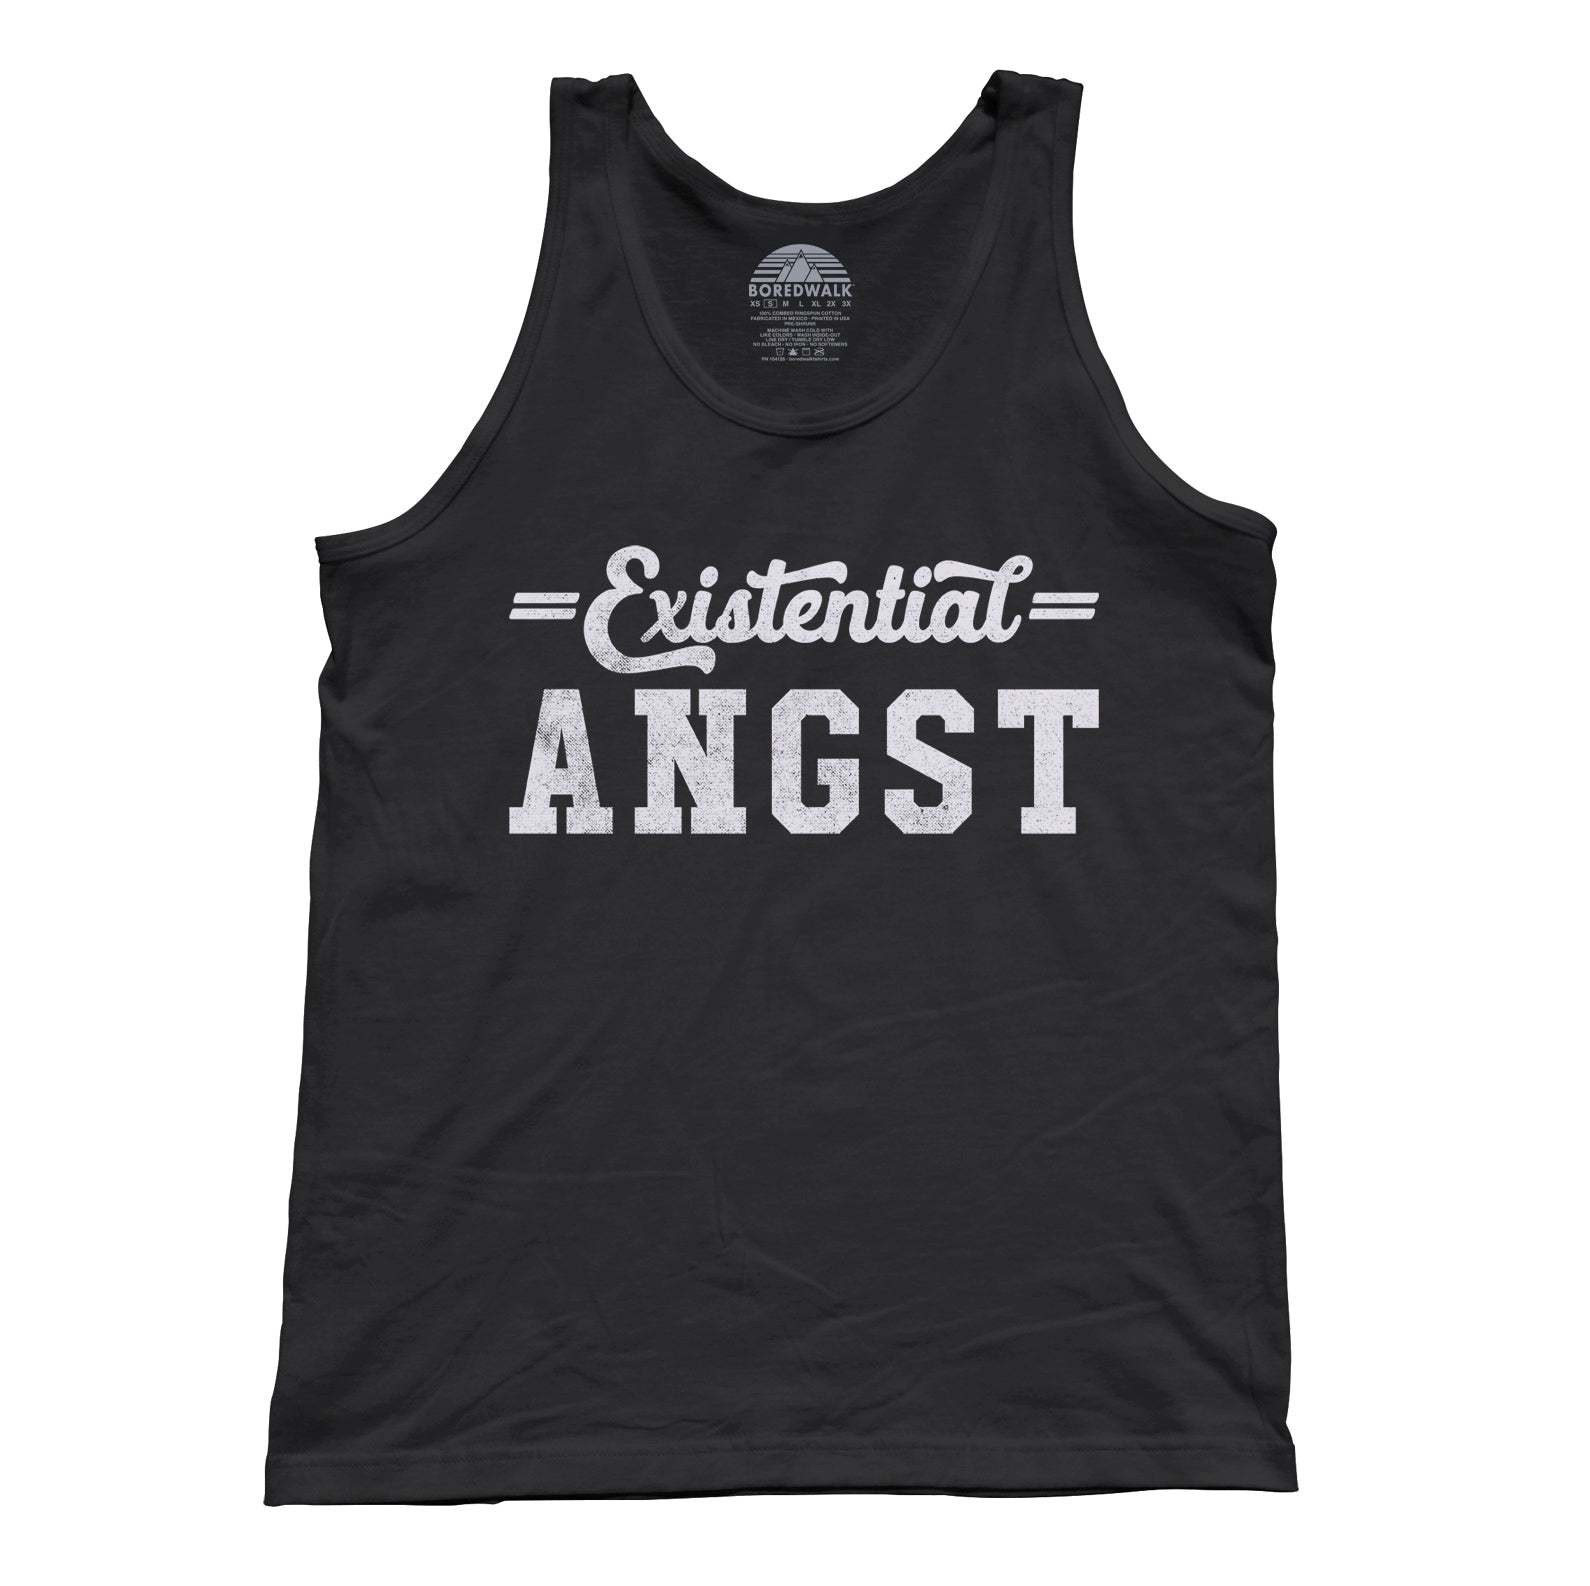 Unisex Existential Angst Tank Top - Funny Existentialism Shirt